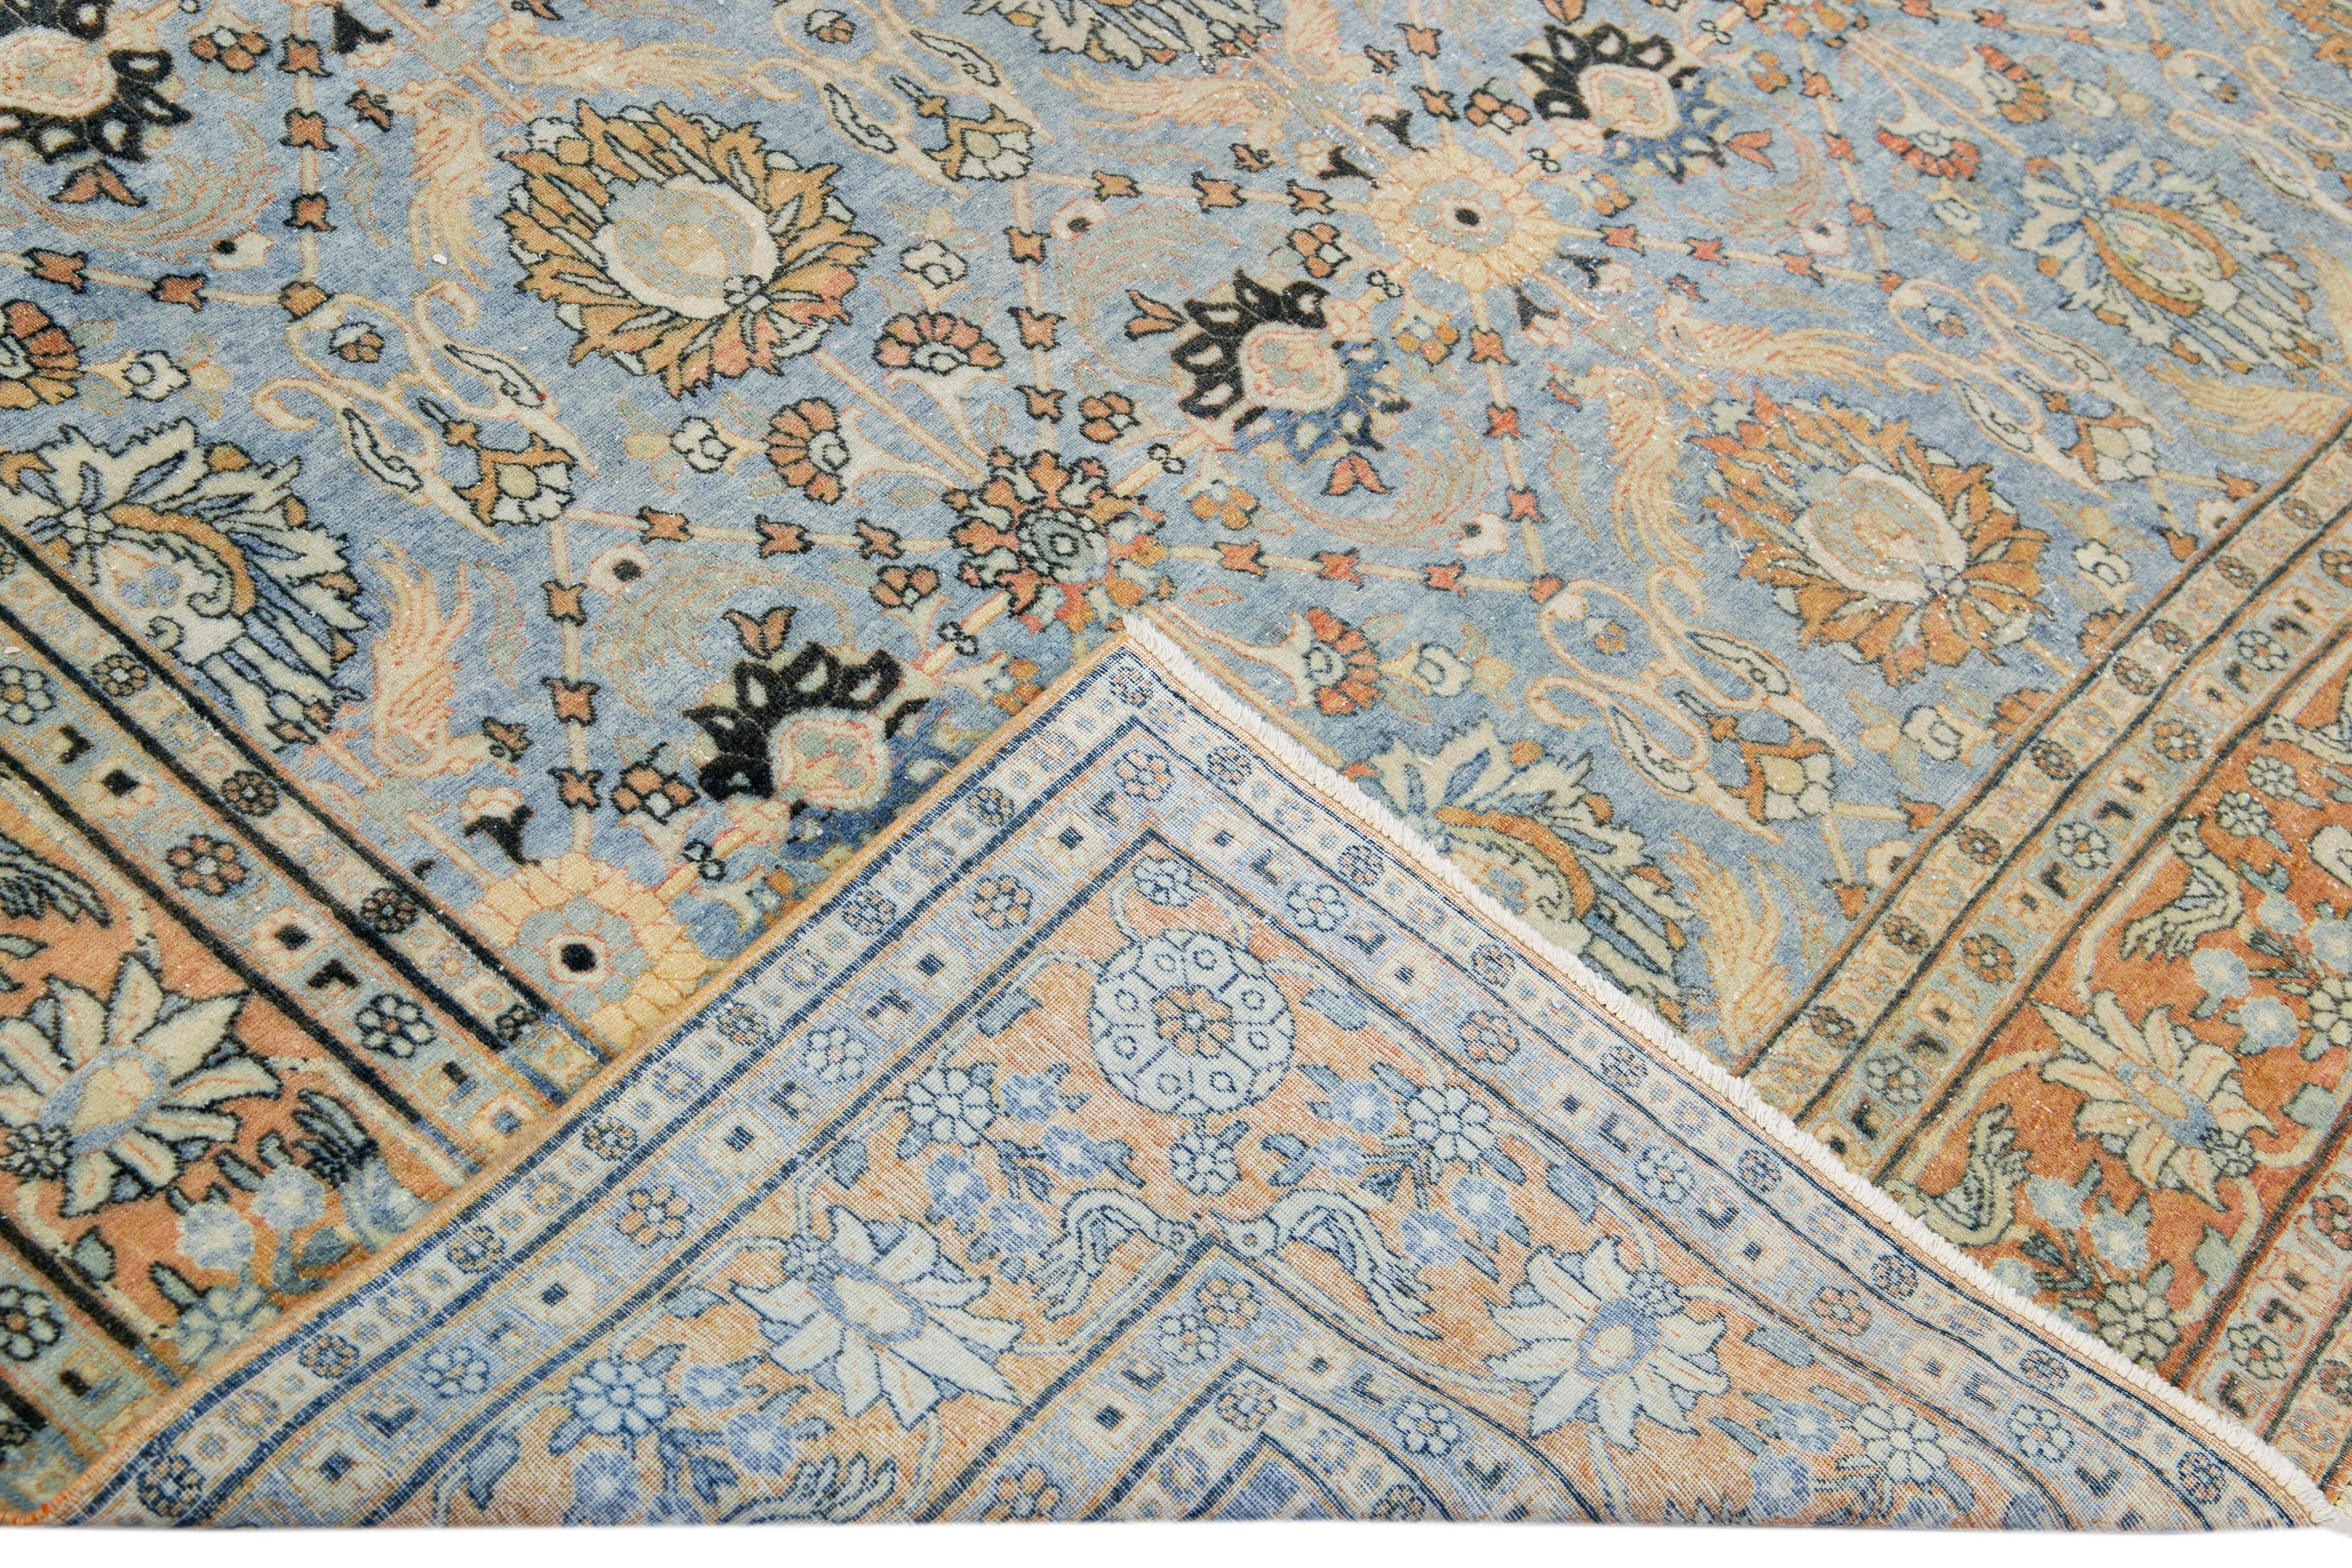 Beautiful antique Persian Tabriz hand-knotted wool rug with a blue field. This piece has a rusted frame and accent in an all-over gorgeous floral design.

This rug measures: 7' x 10'6